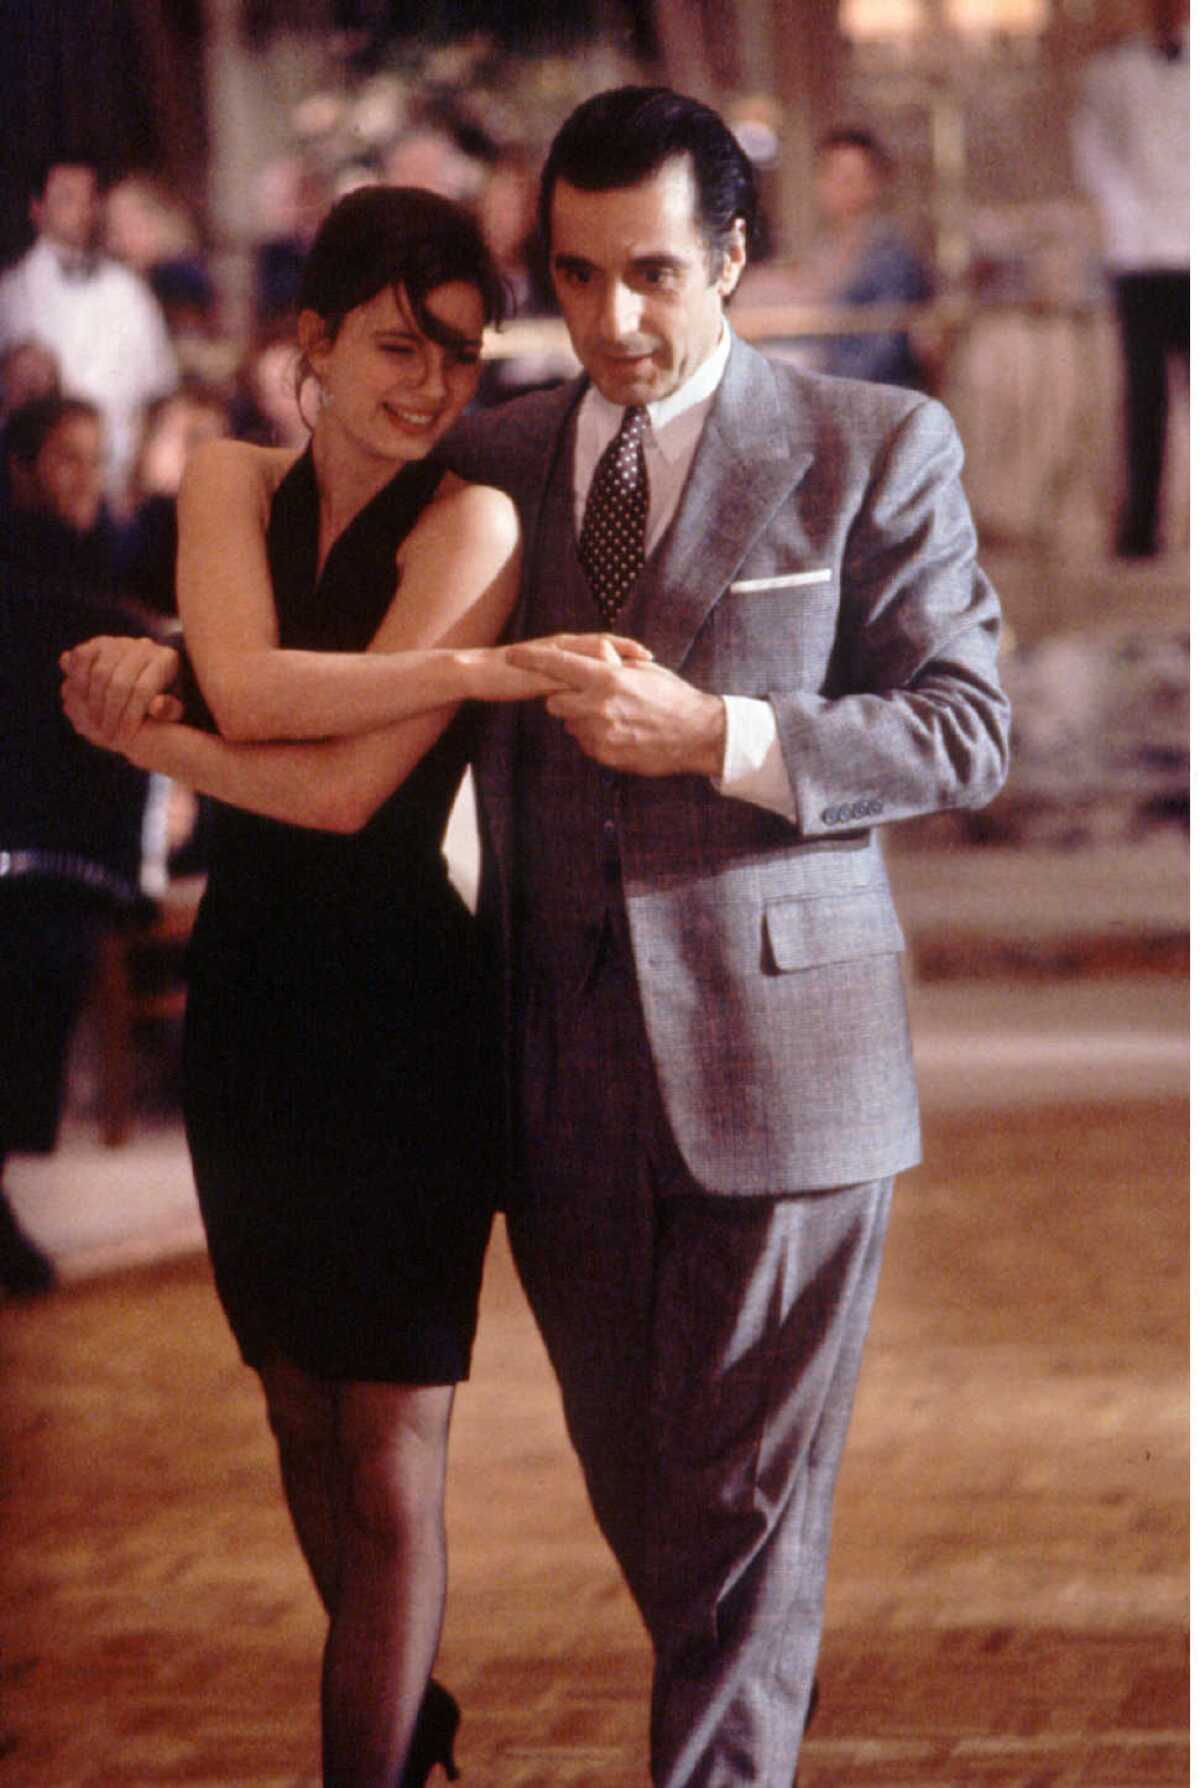 Al Pacino and Gabrielle Anwar in a scene from "Scent of a Woman."